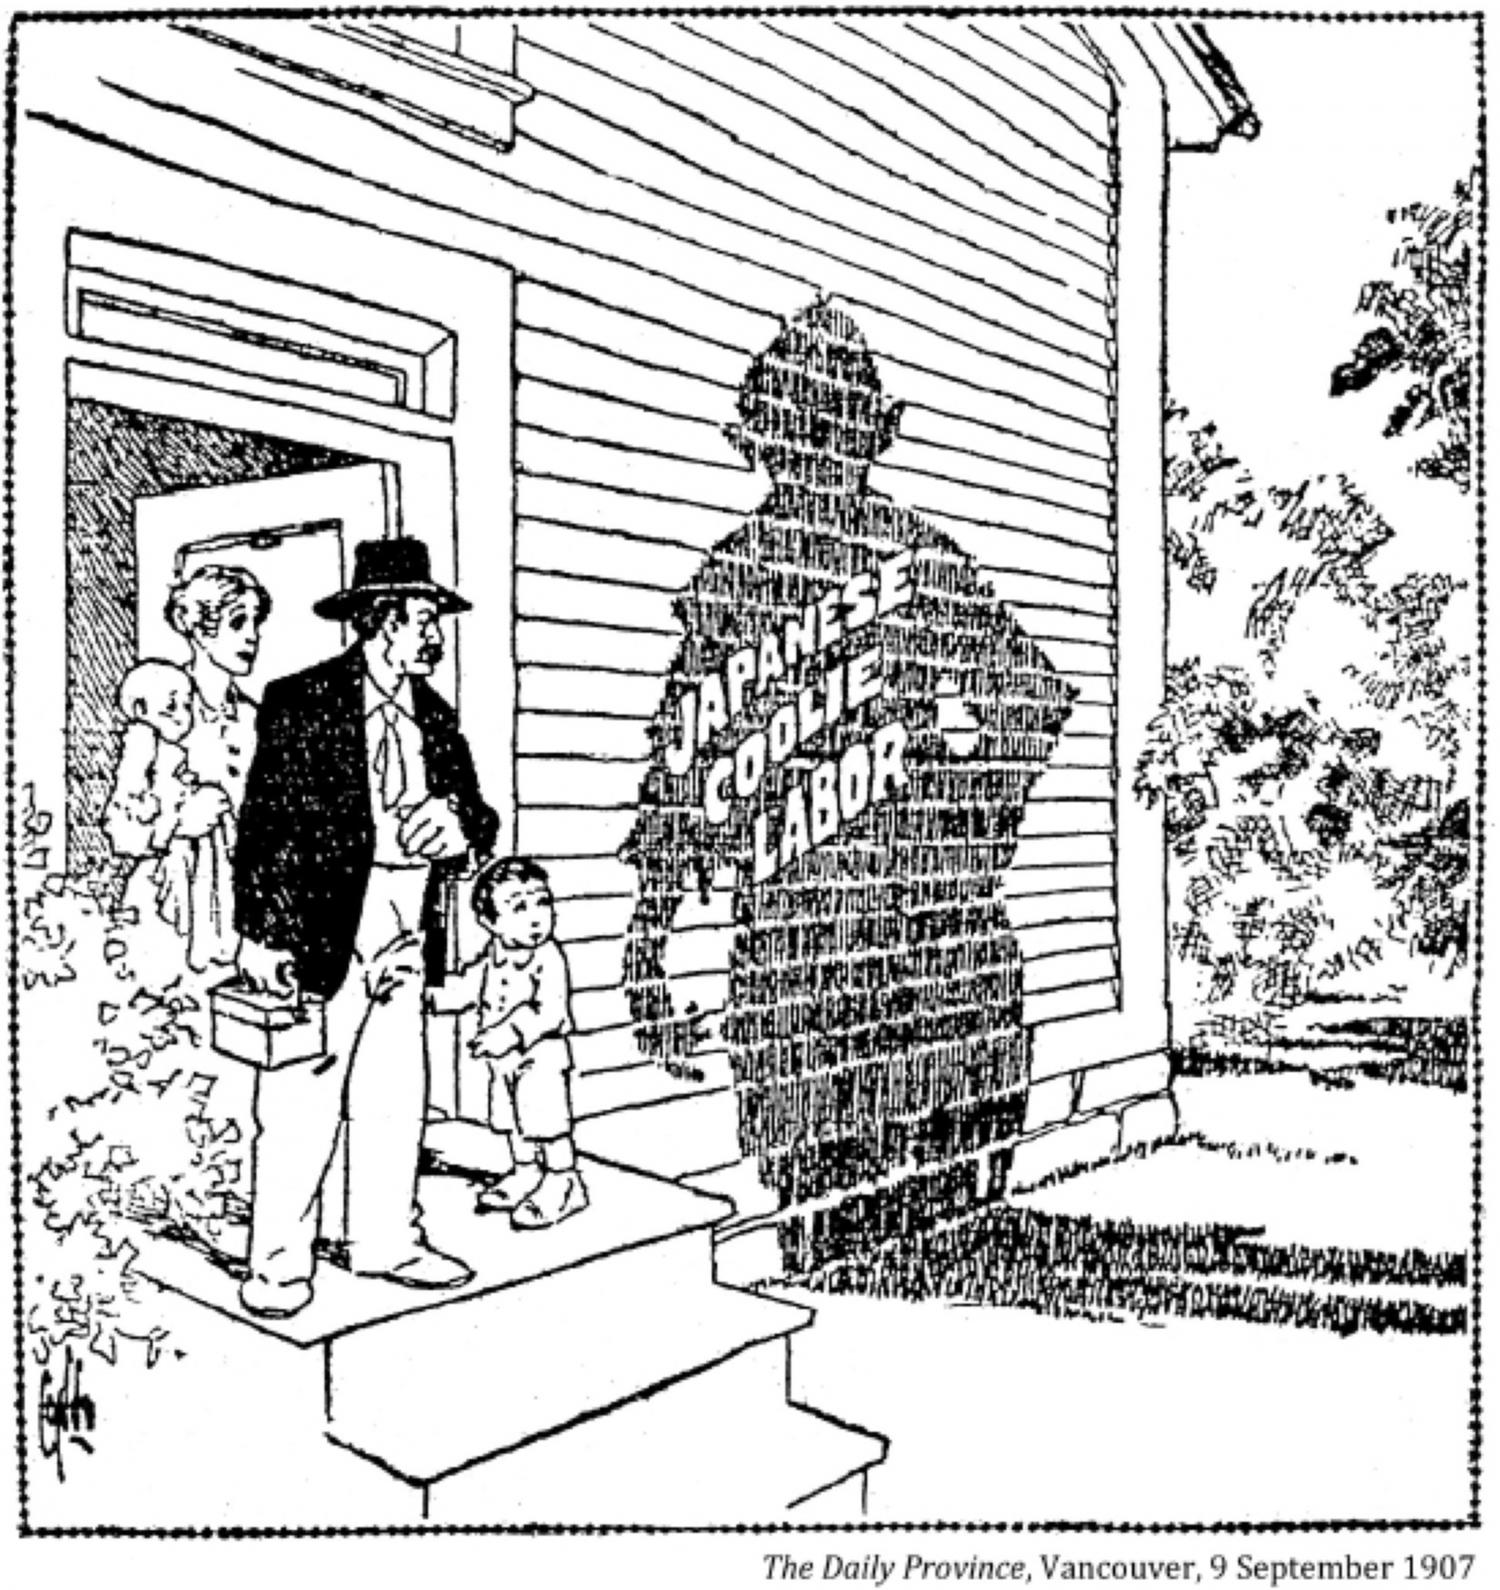 Racist cartoon published by Daily Province on September 9, 1907.